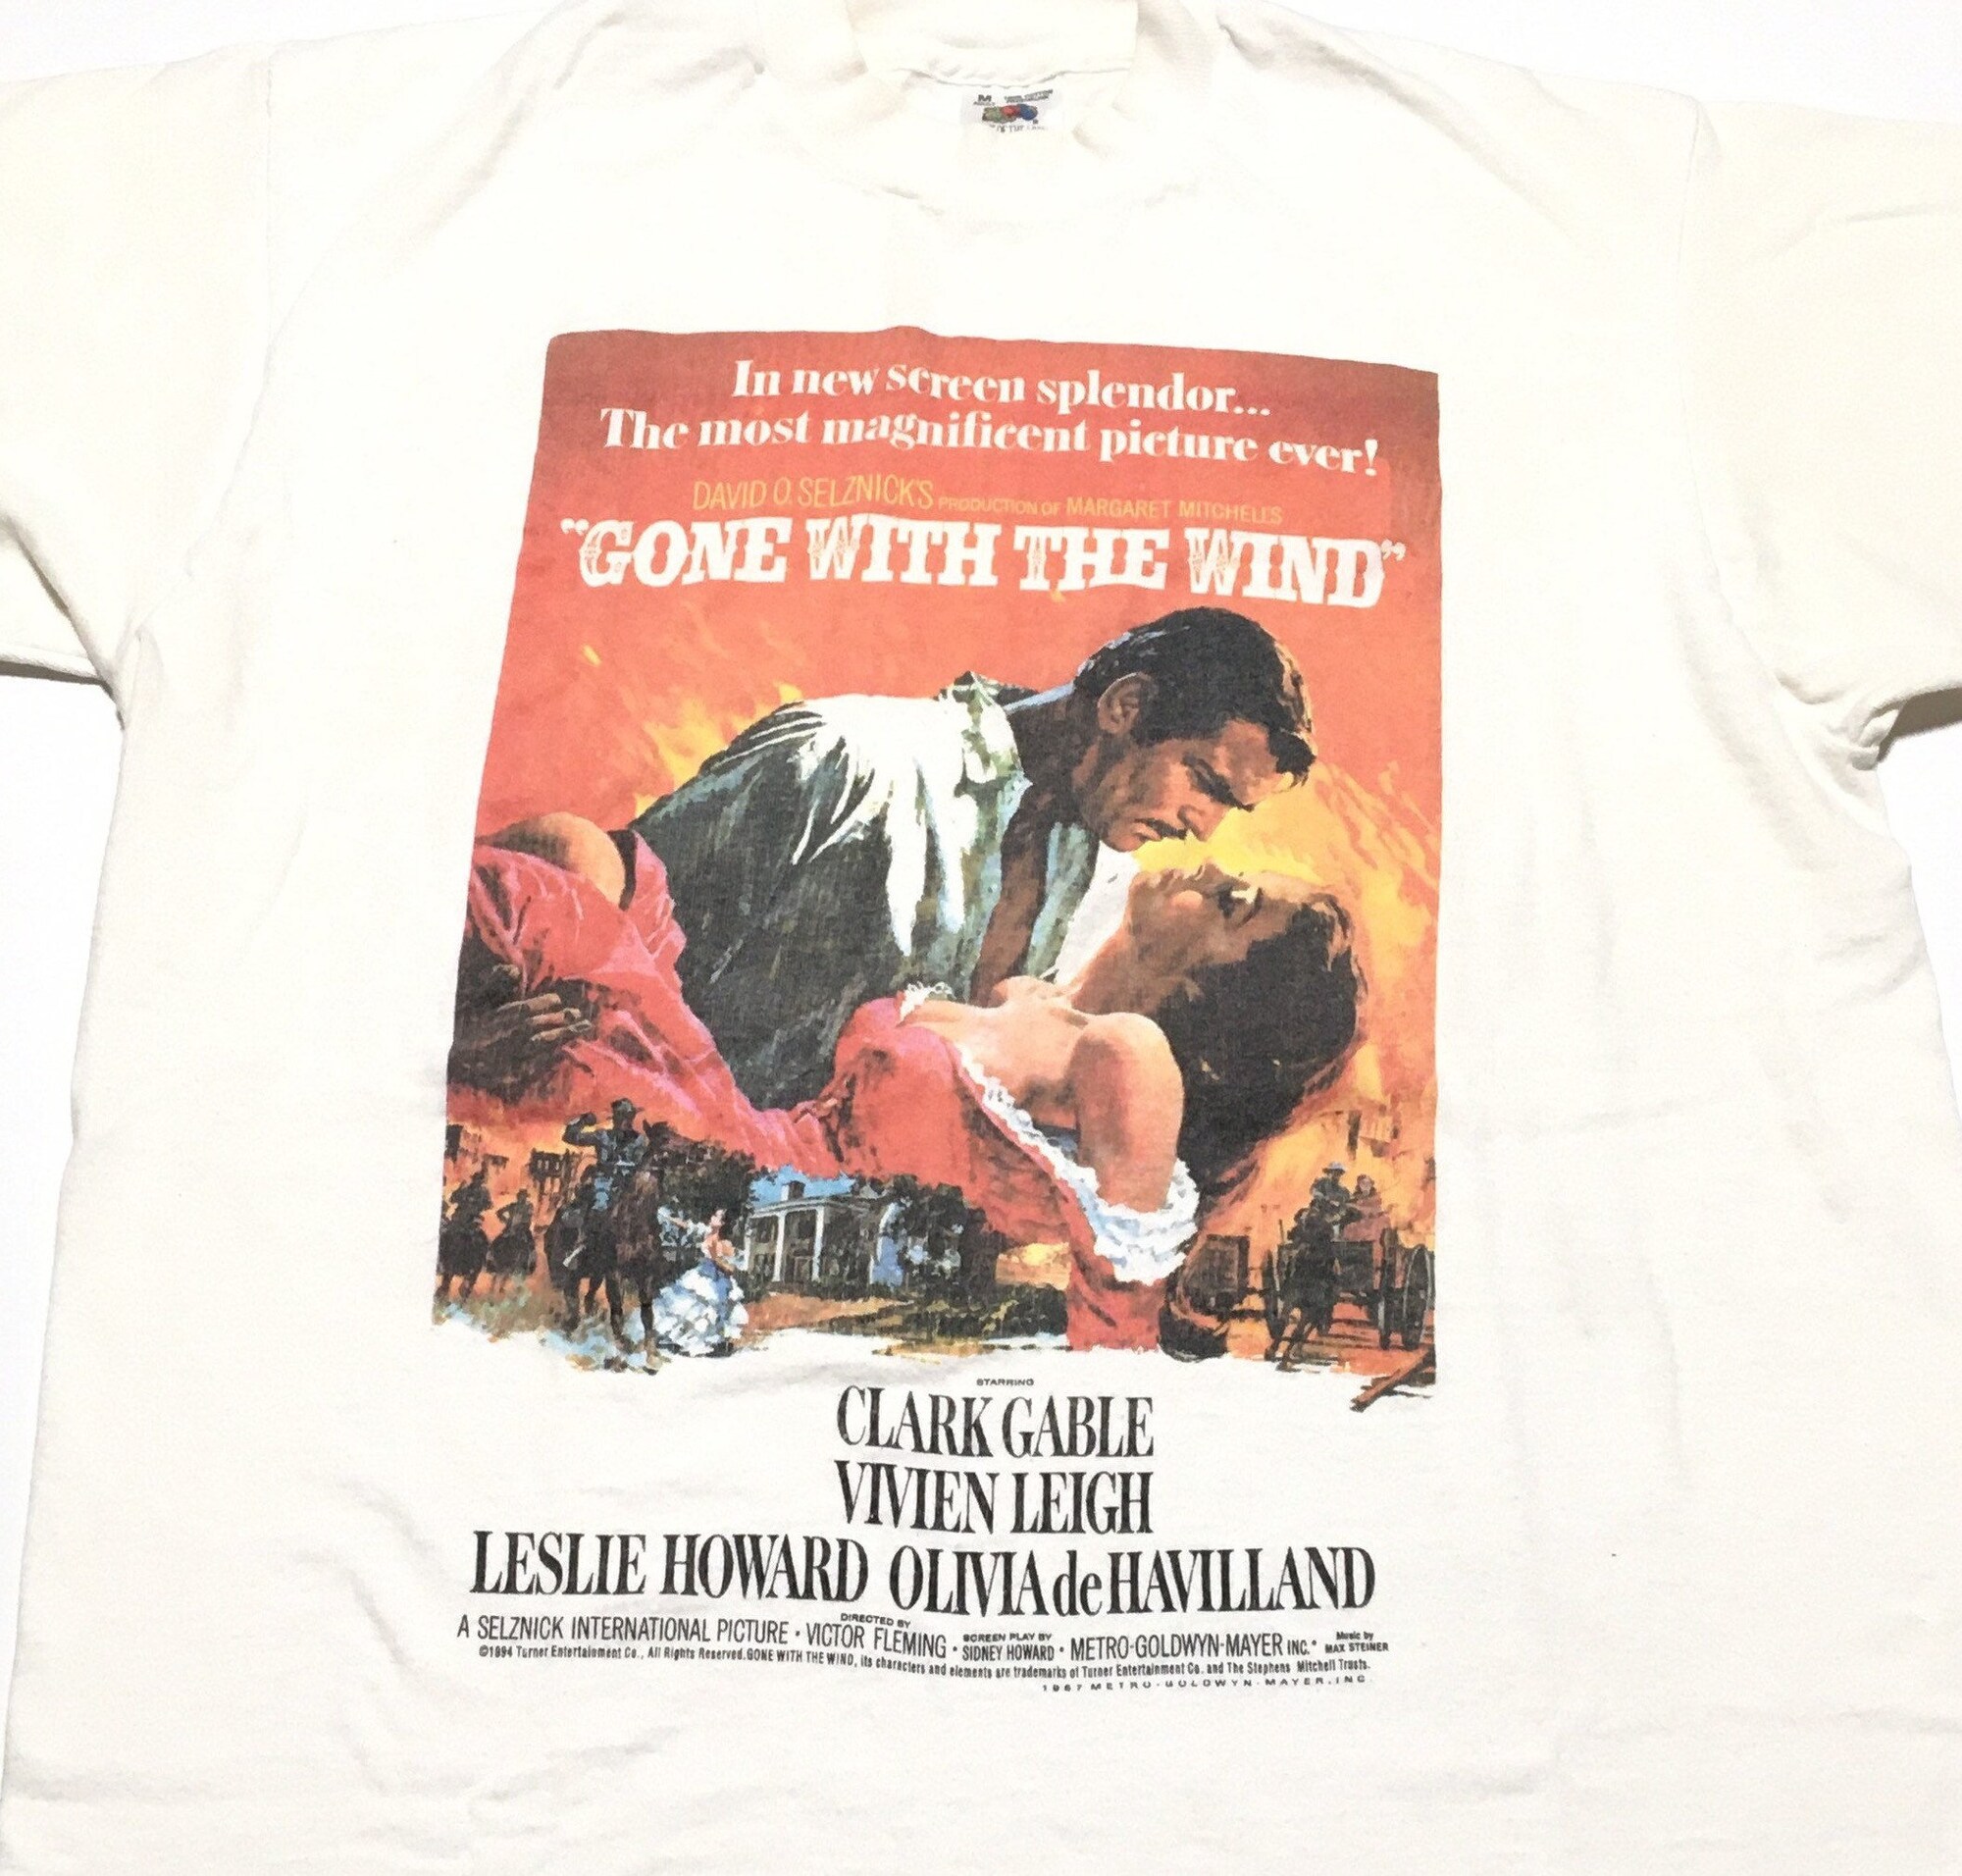 Vintage 90s Gone With The Wind Movie T-Shirt